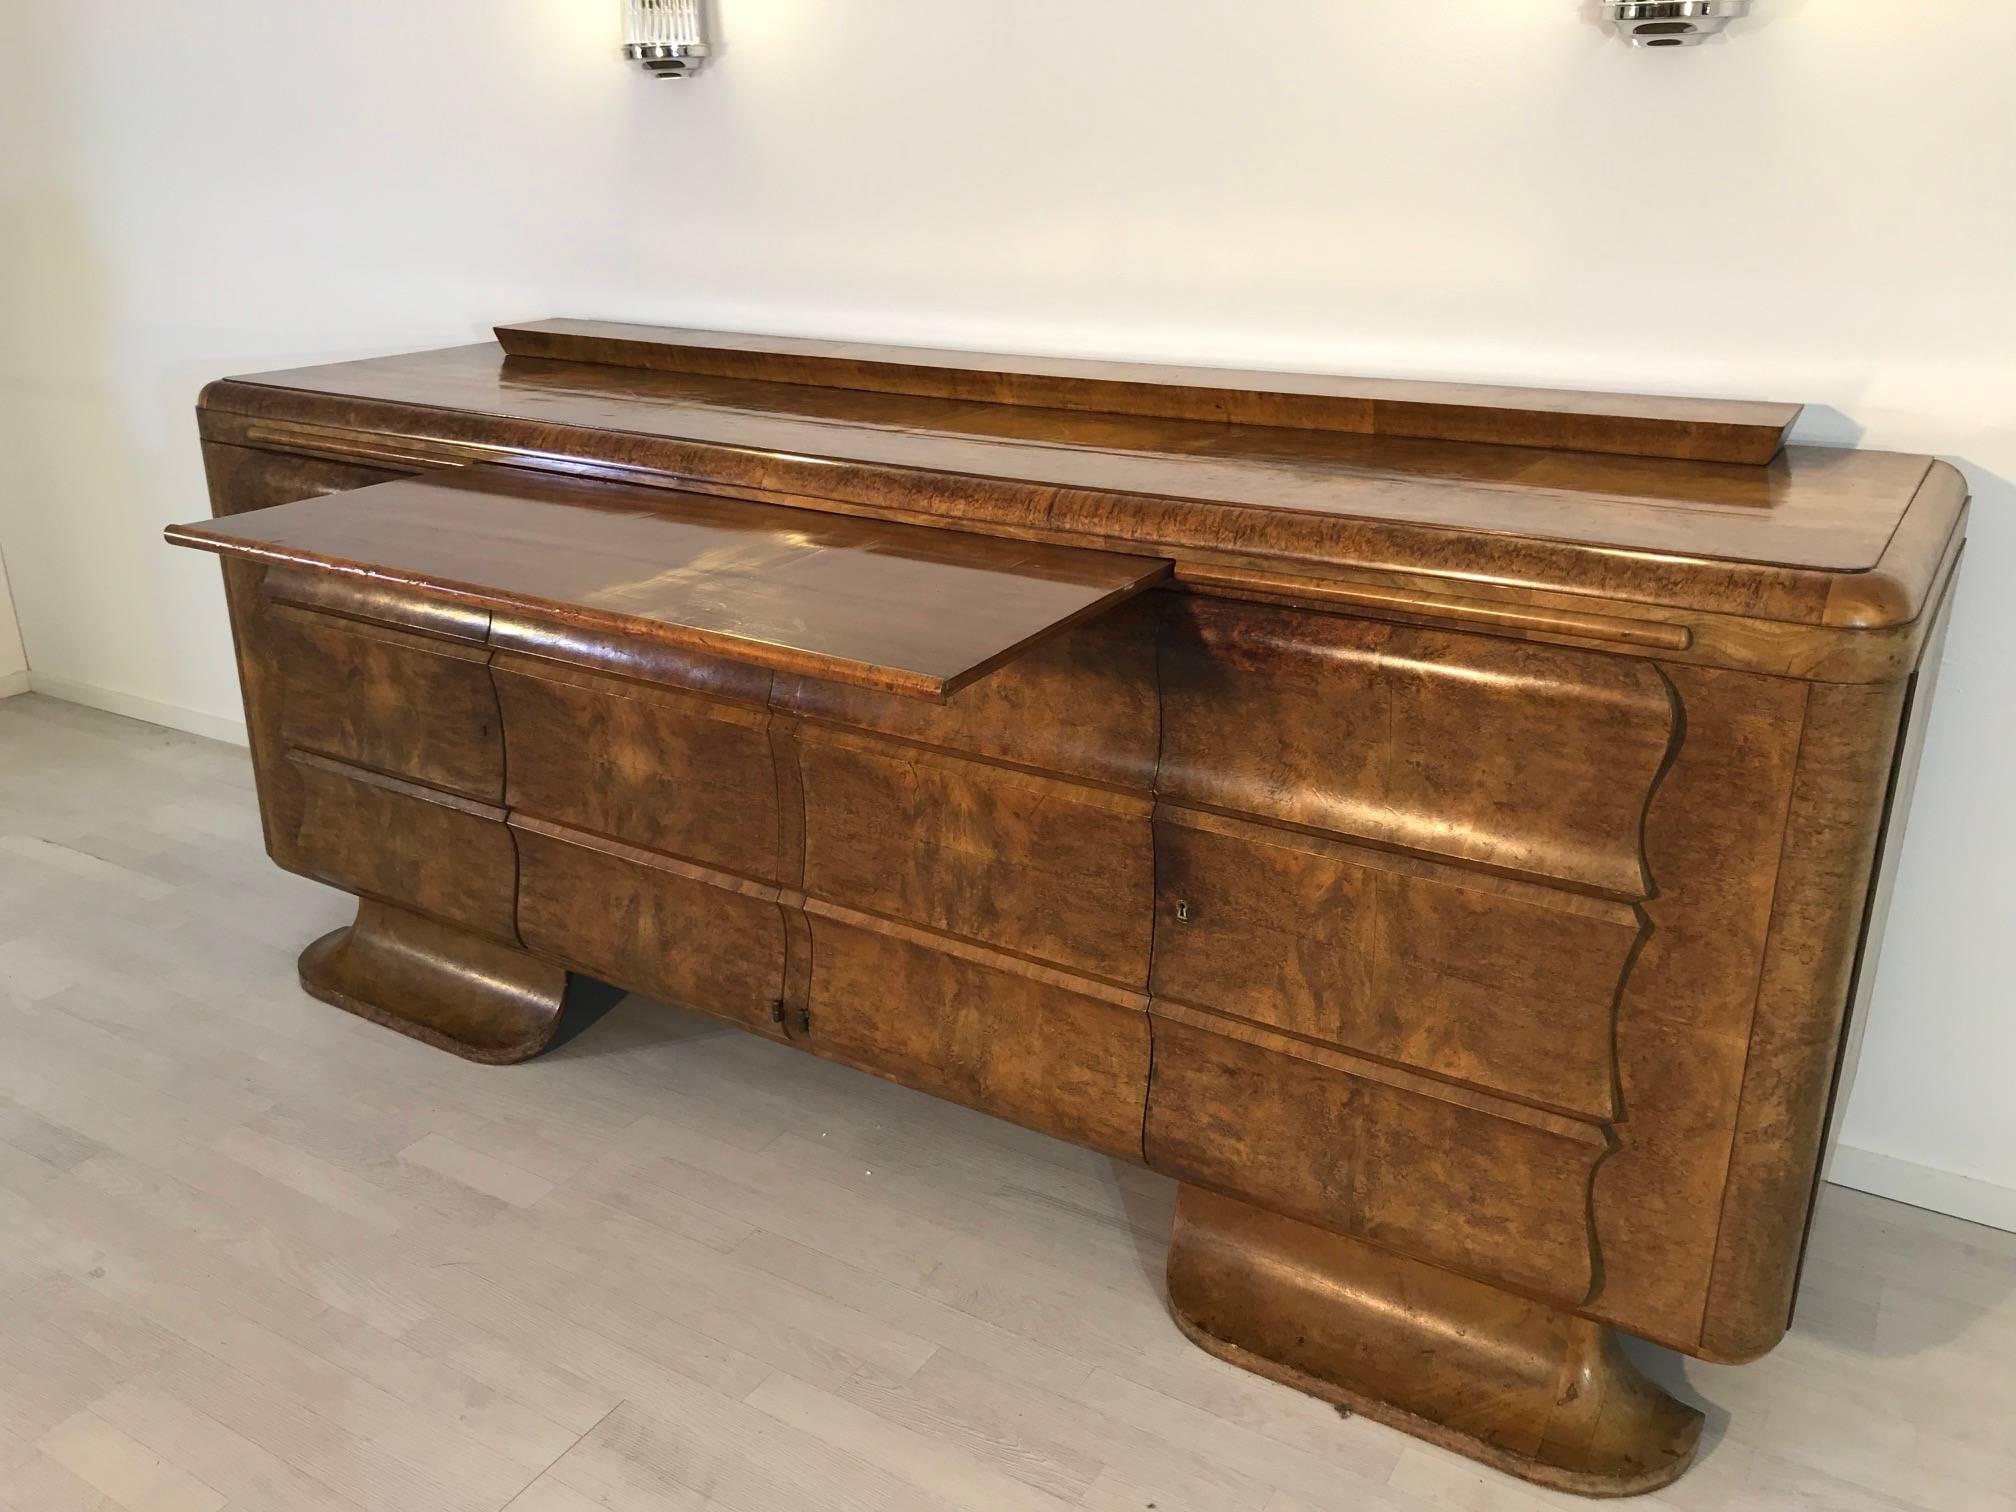 Large Art Deco sideboard with great burl wood veneer made of walnut wood. This unique single piece convinces with its beautiful Art Deco body, great French feet and fine details. A real eyecatcher in every living room with a wonderful combination of